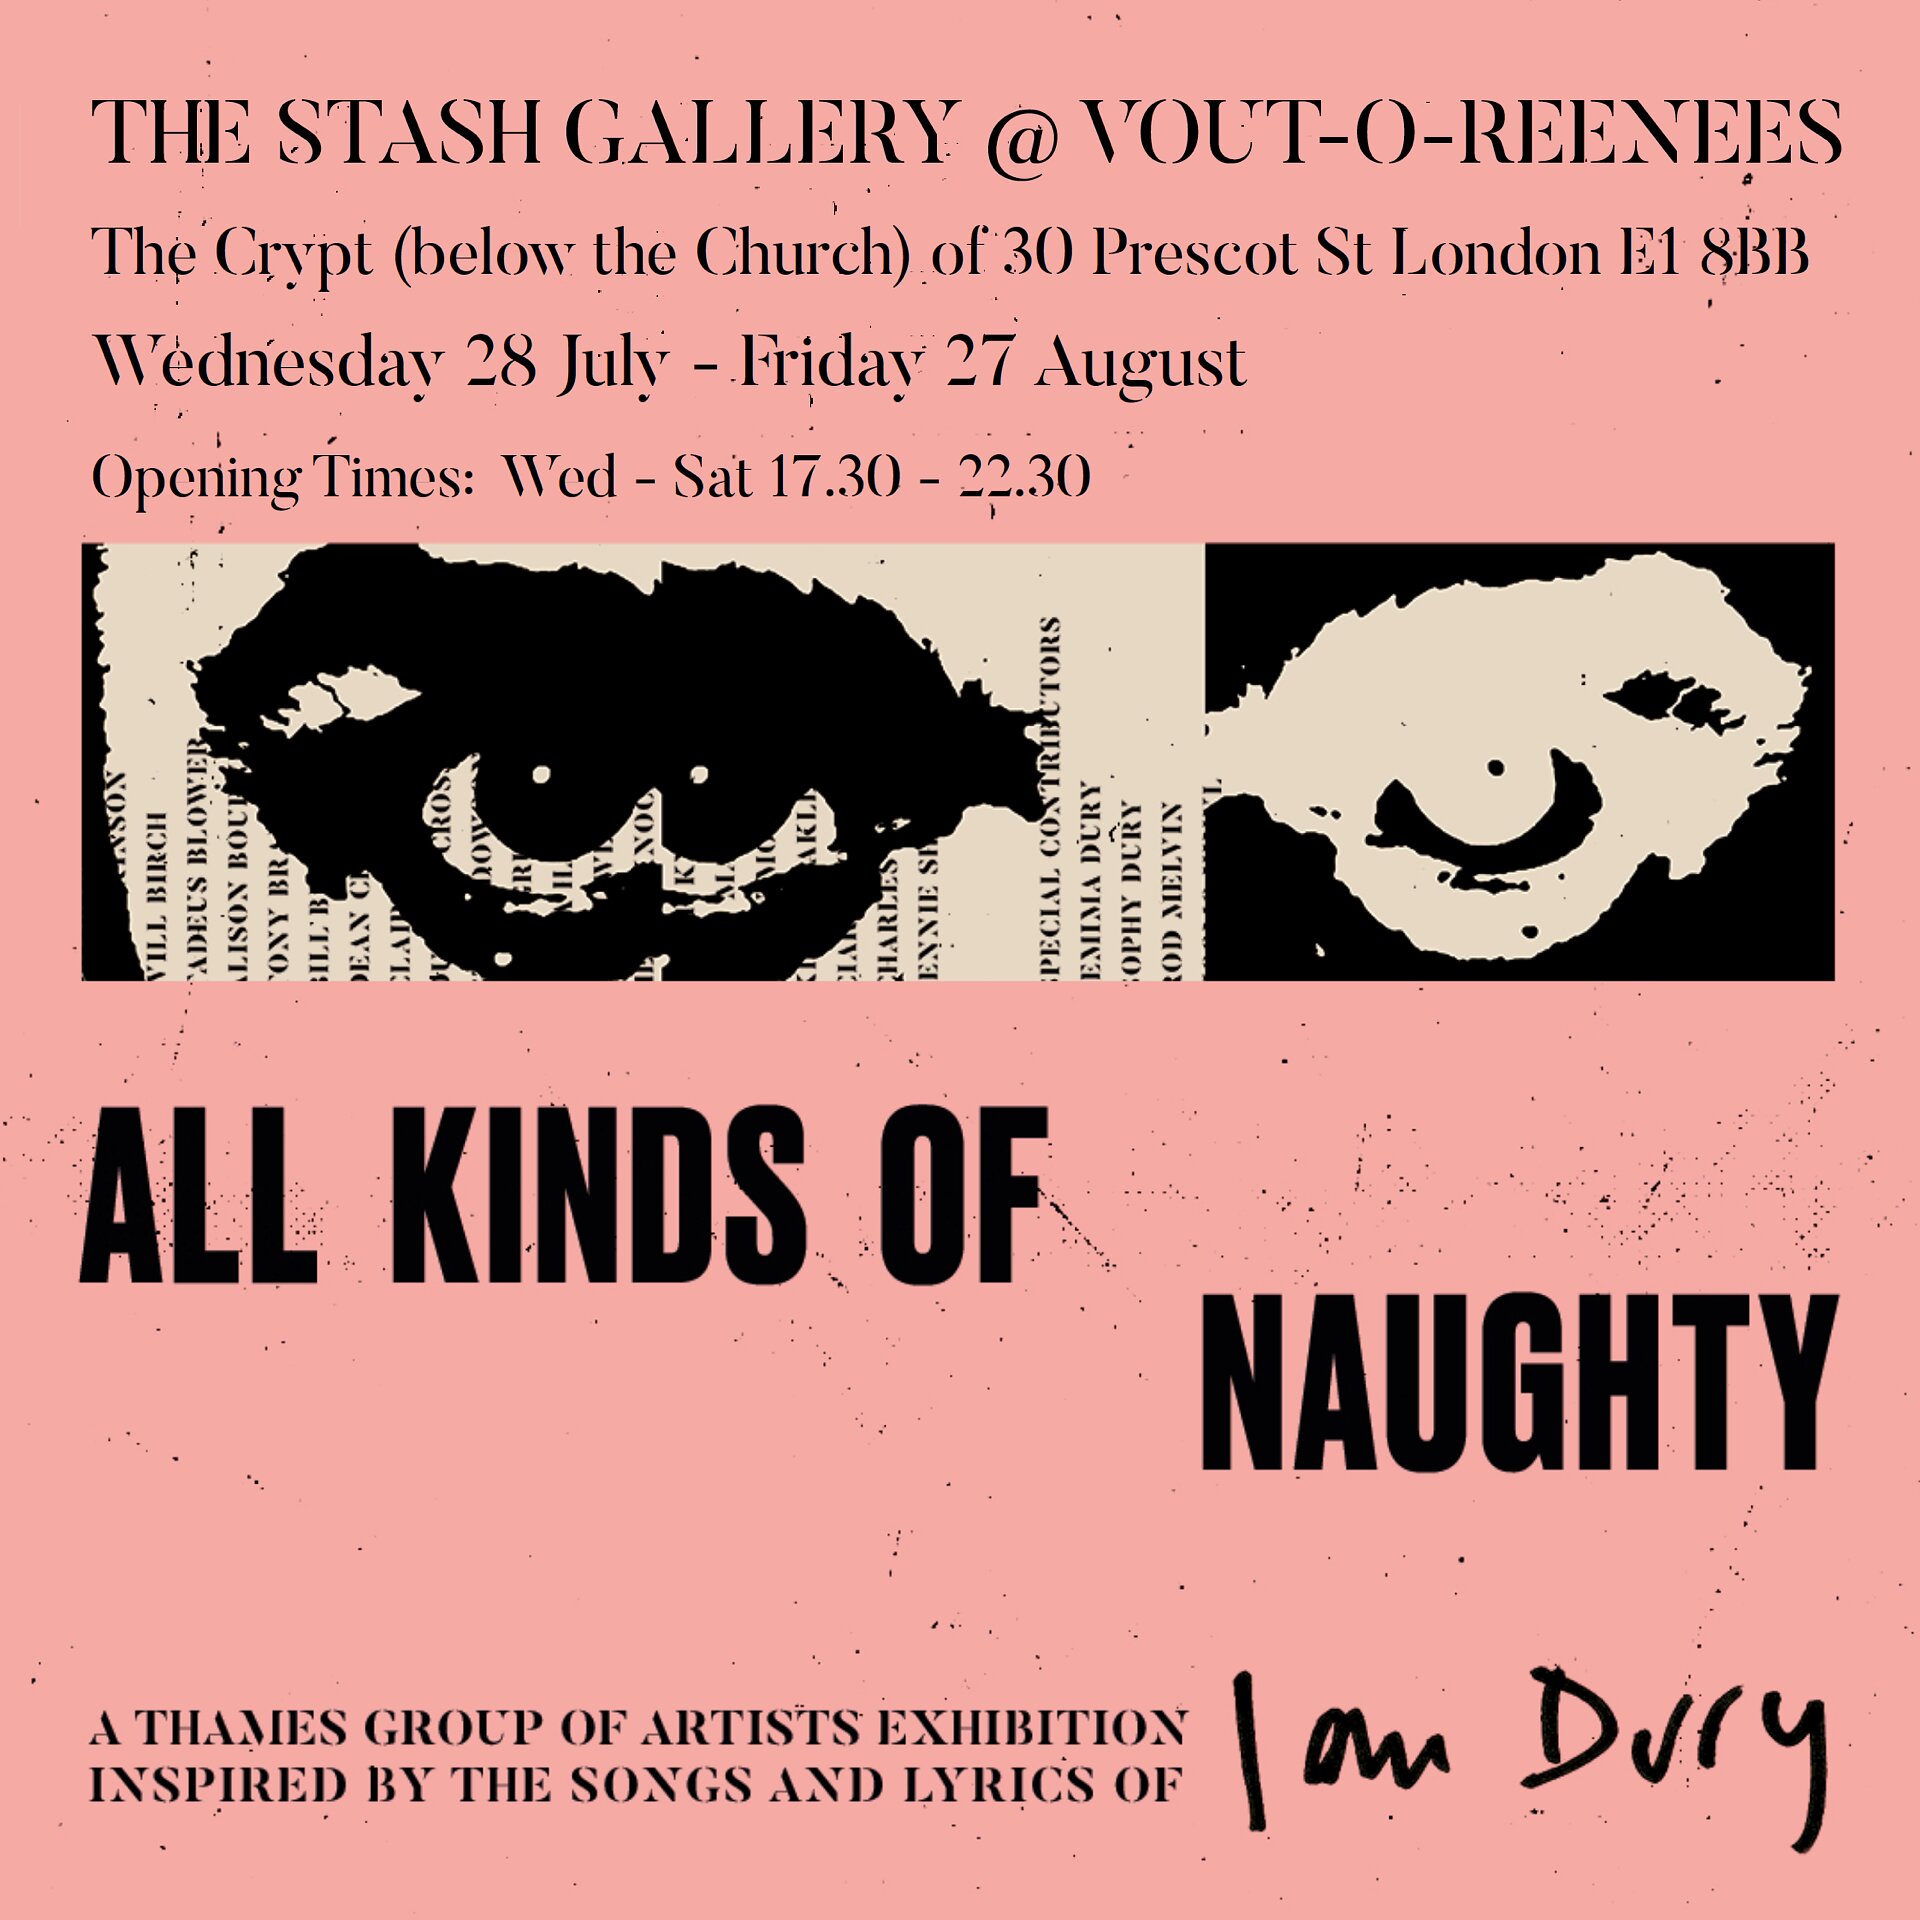 All Kinds Of Naughty: The Stash Gallery London